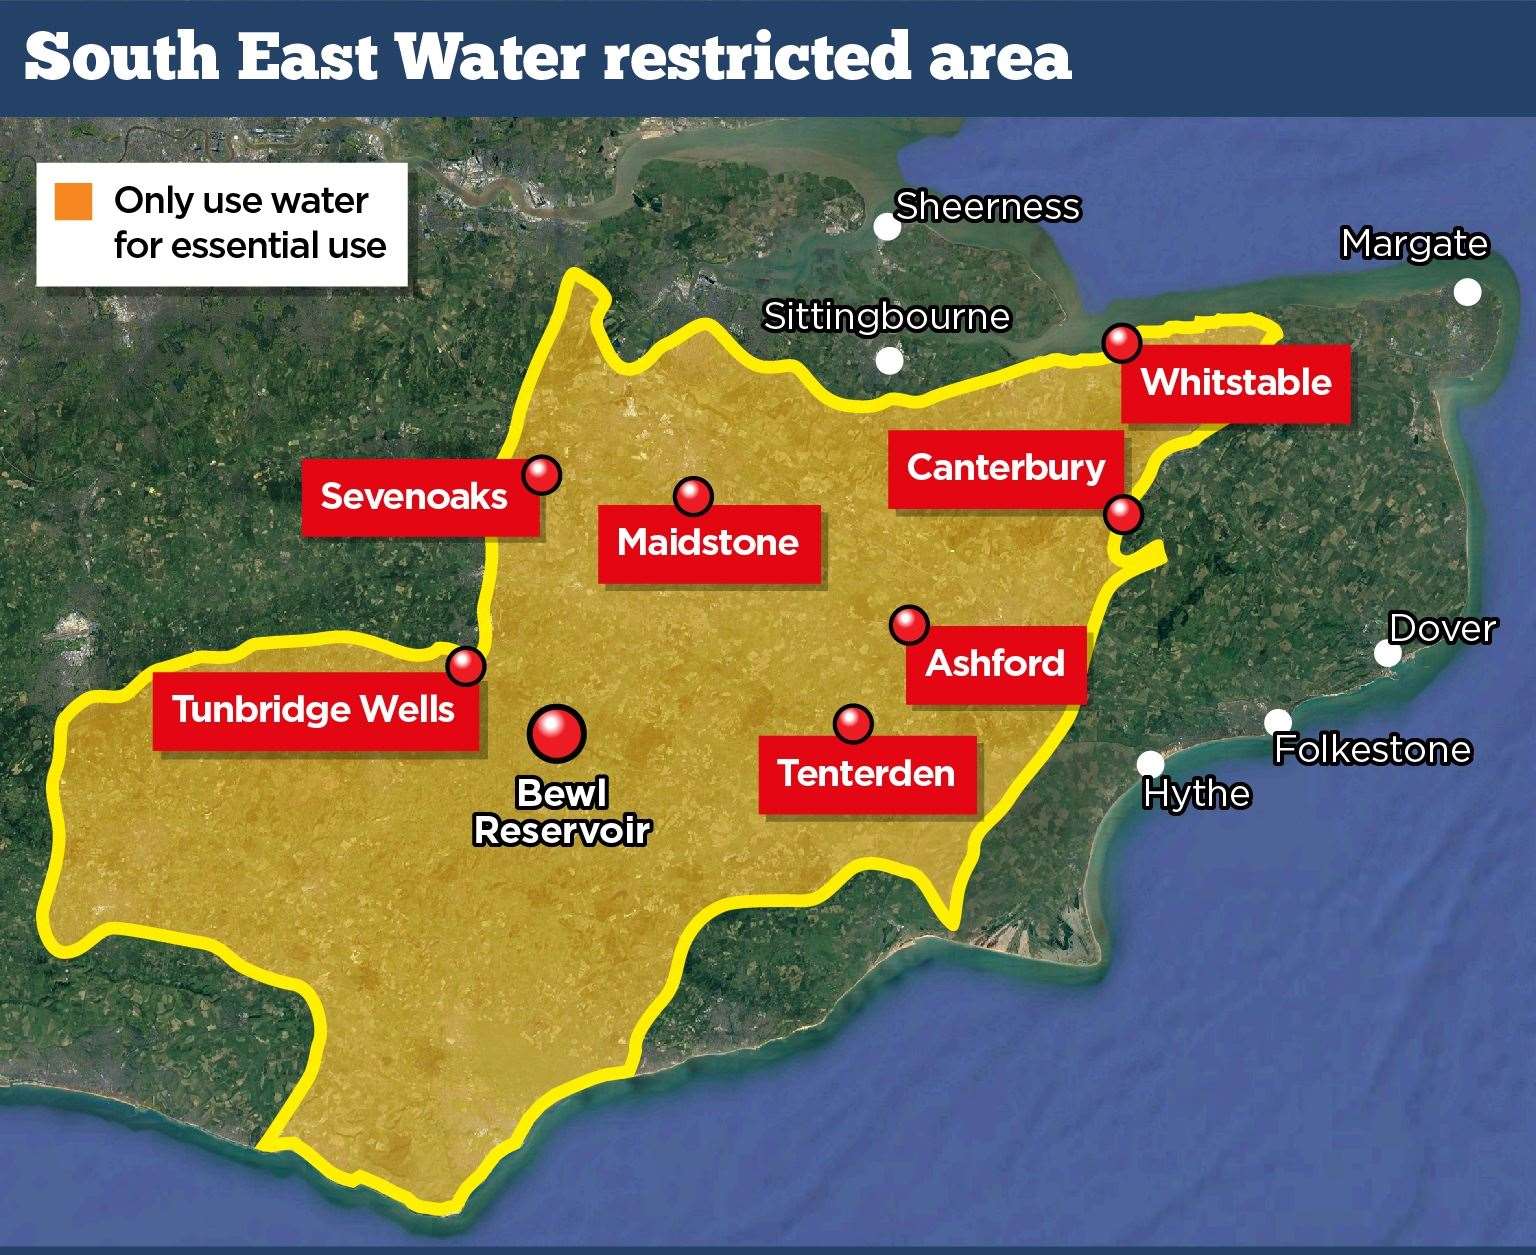 The parts of the south east where water restrictions will be introduced on June 26